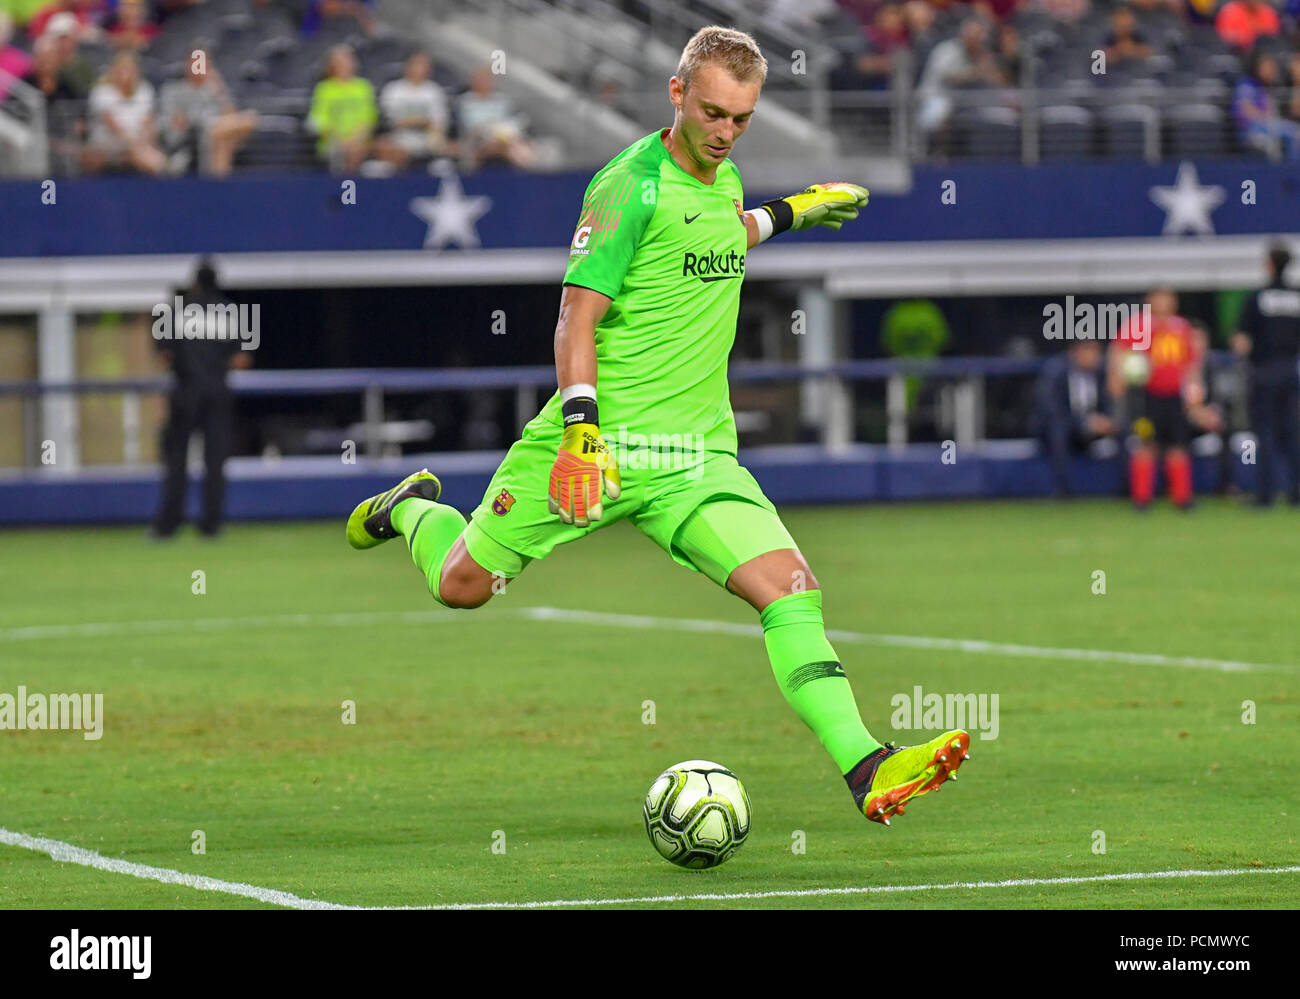 Jul 31, 2018: FC Barcelona GK Jasper Cillessen #13 during an MLS game between AS Roma and FC Barcelona at AT&T Stadium in Arlington, TX AS Roma defeated FC Barcelona 4-2 Albert Pena/CSM Stock Photo